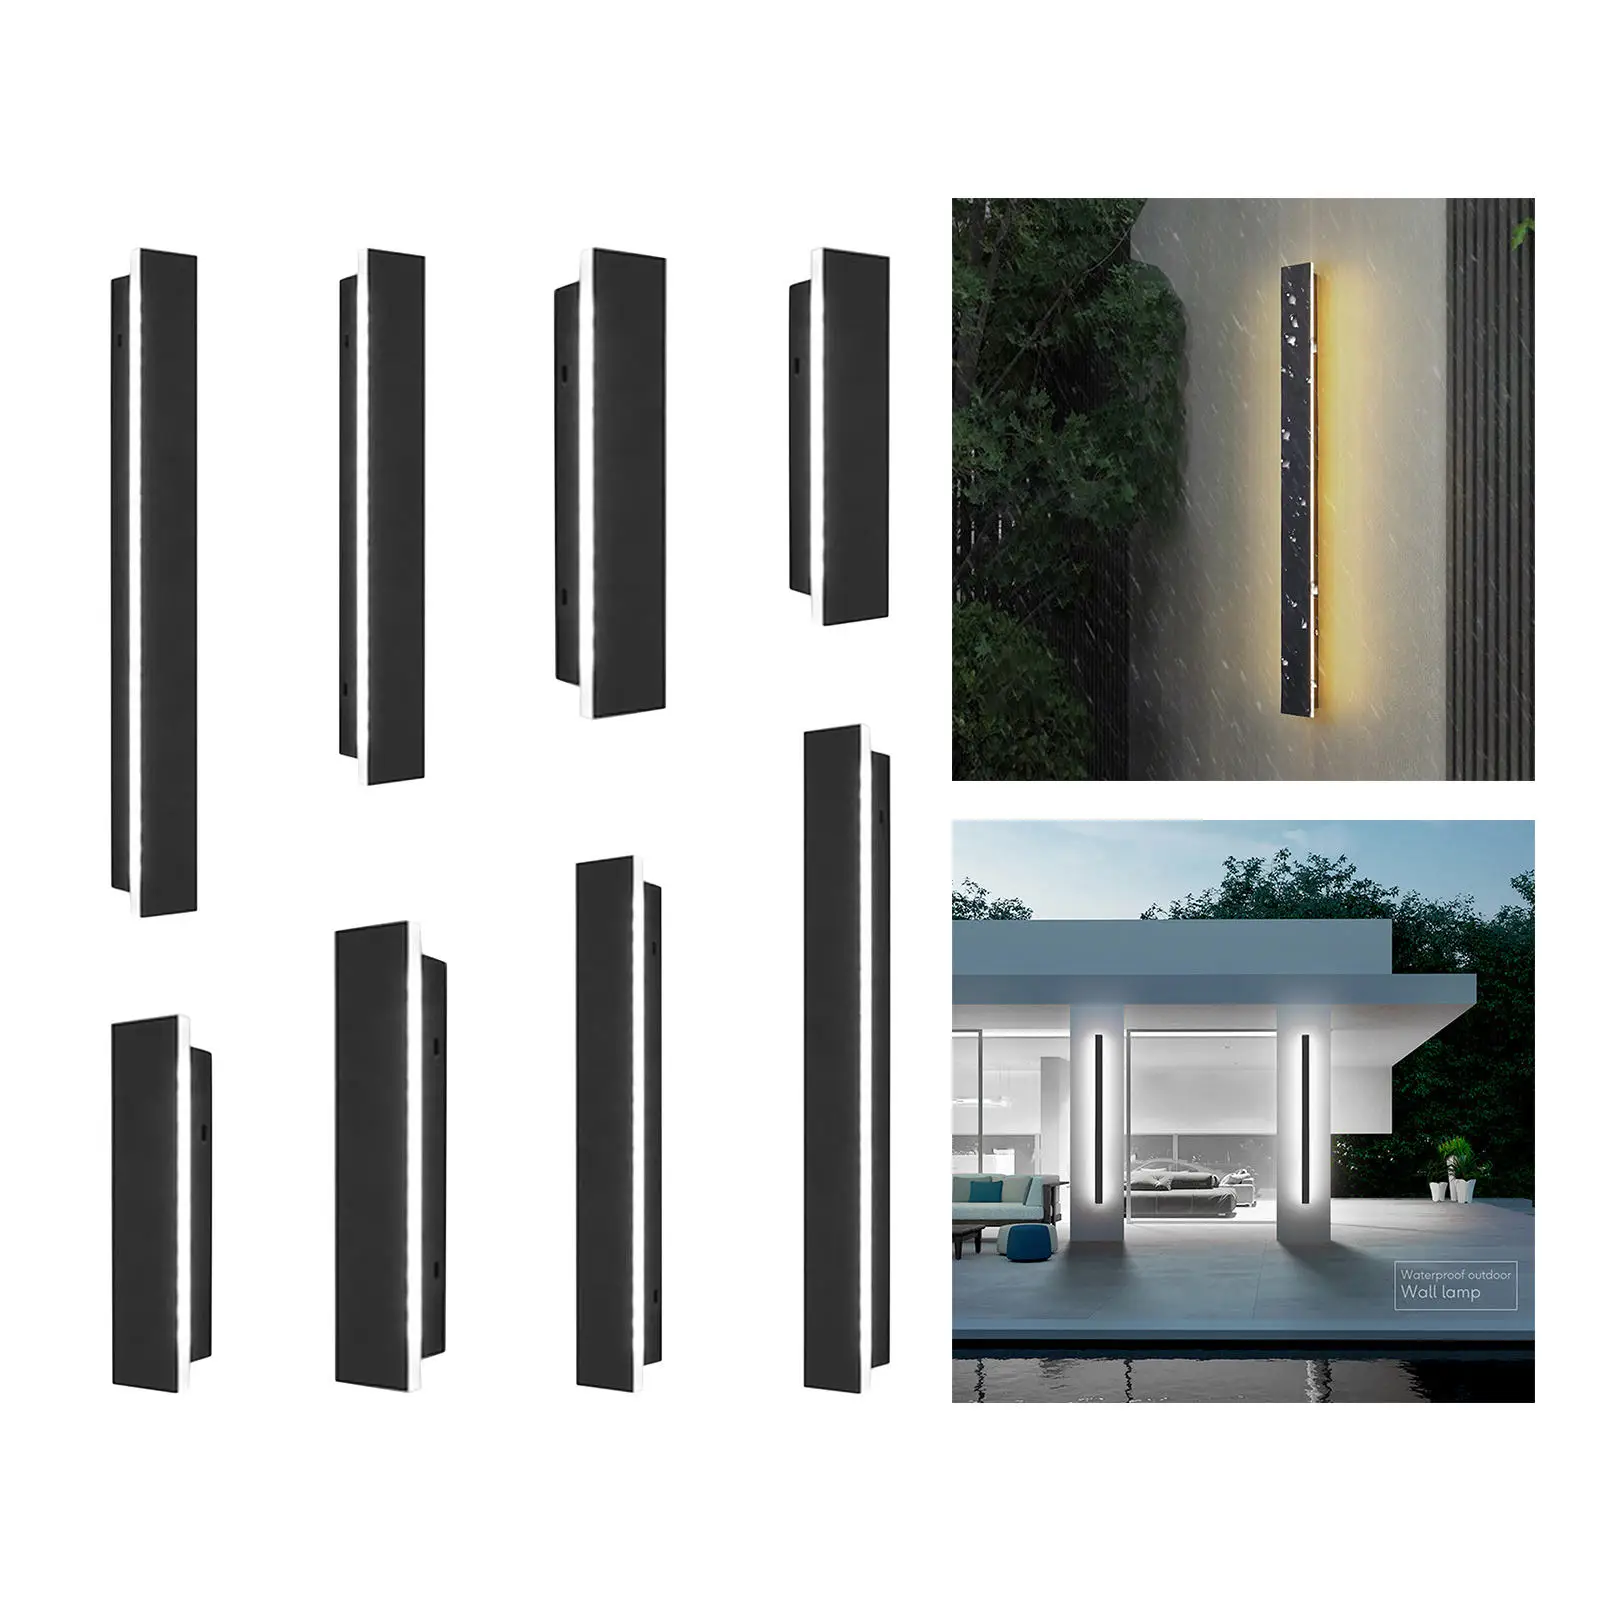 Outdoor Long Strip Modern LED Wall Lighting Fixture Lamps, Elegant Frosted Black Iron Body IP65 Waterproof Anti Rust